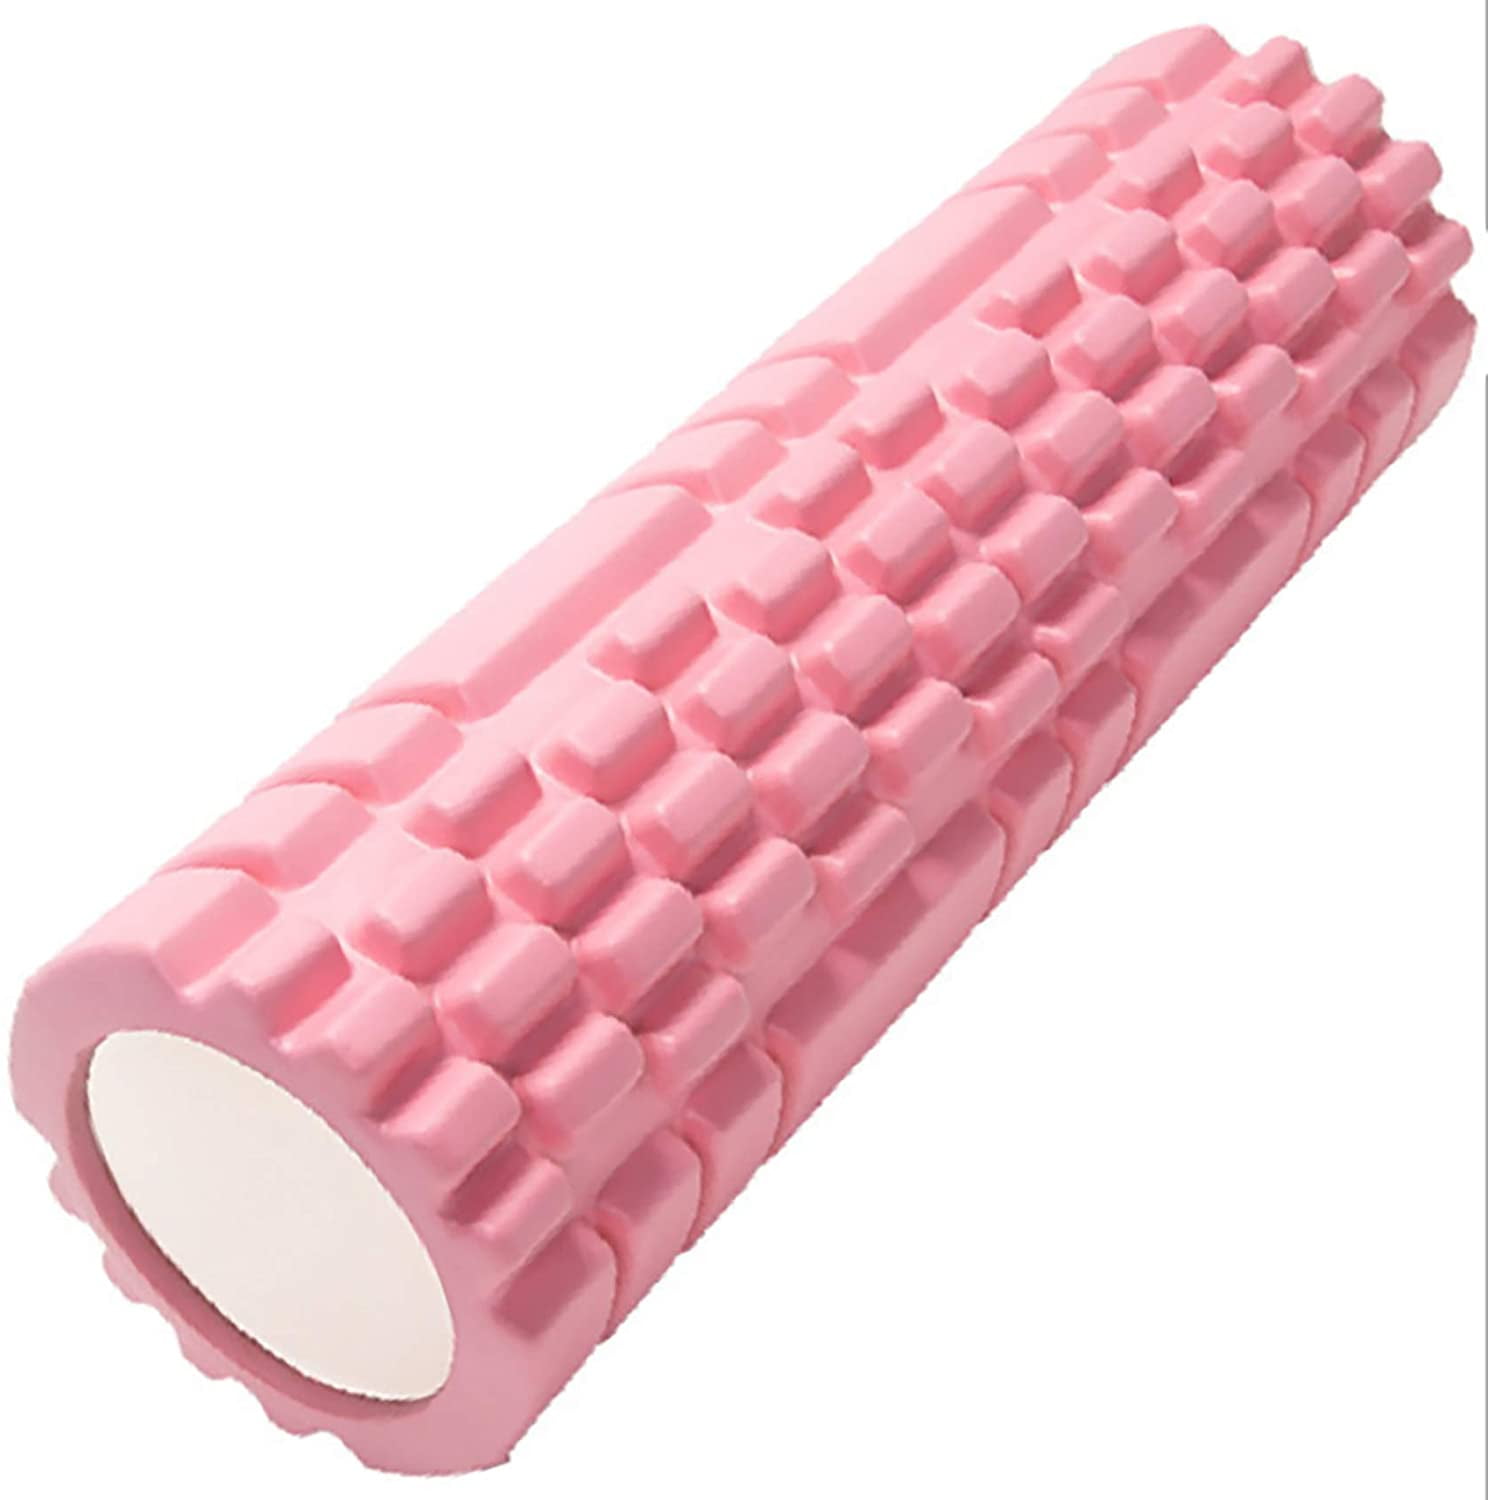 Pink Yoga Pilates Foam Roller Home Workout Exercise Fitness Gym Deluxe Roller 